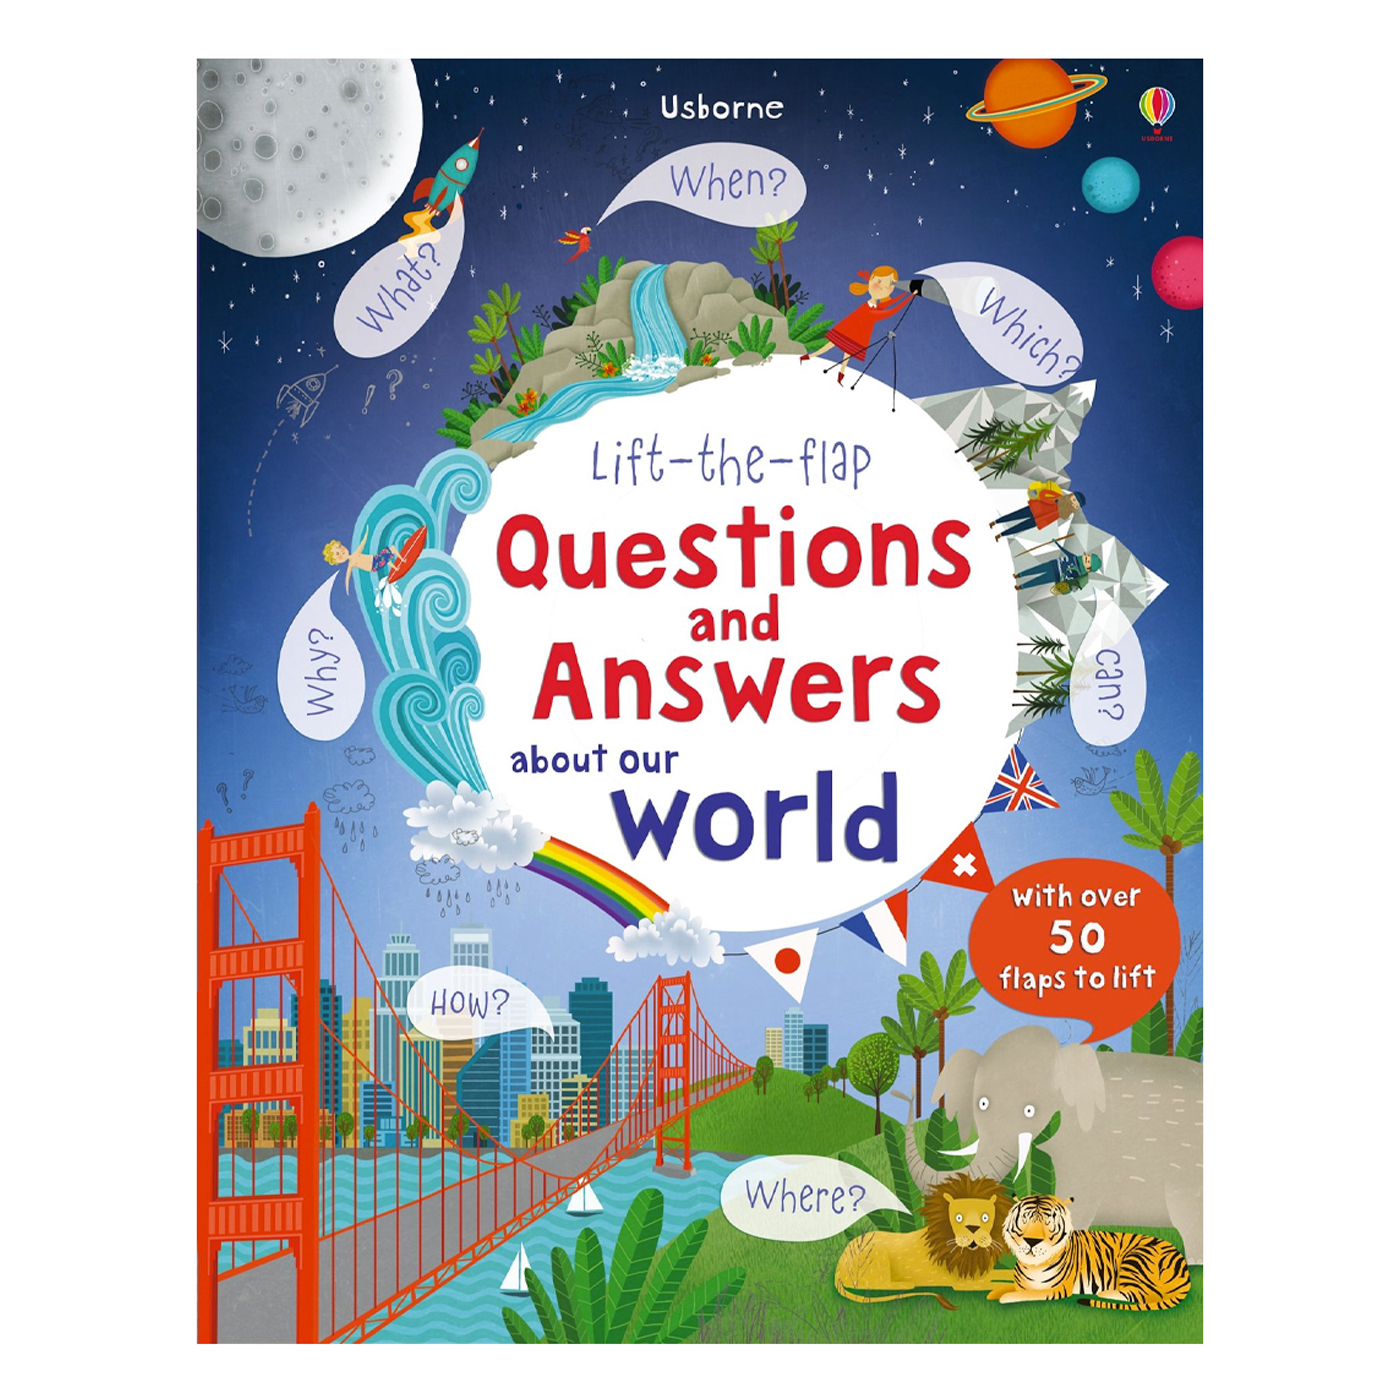 USBORNE Lift-the-flap Questions and Answers World